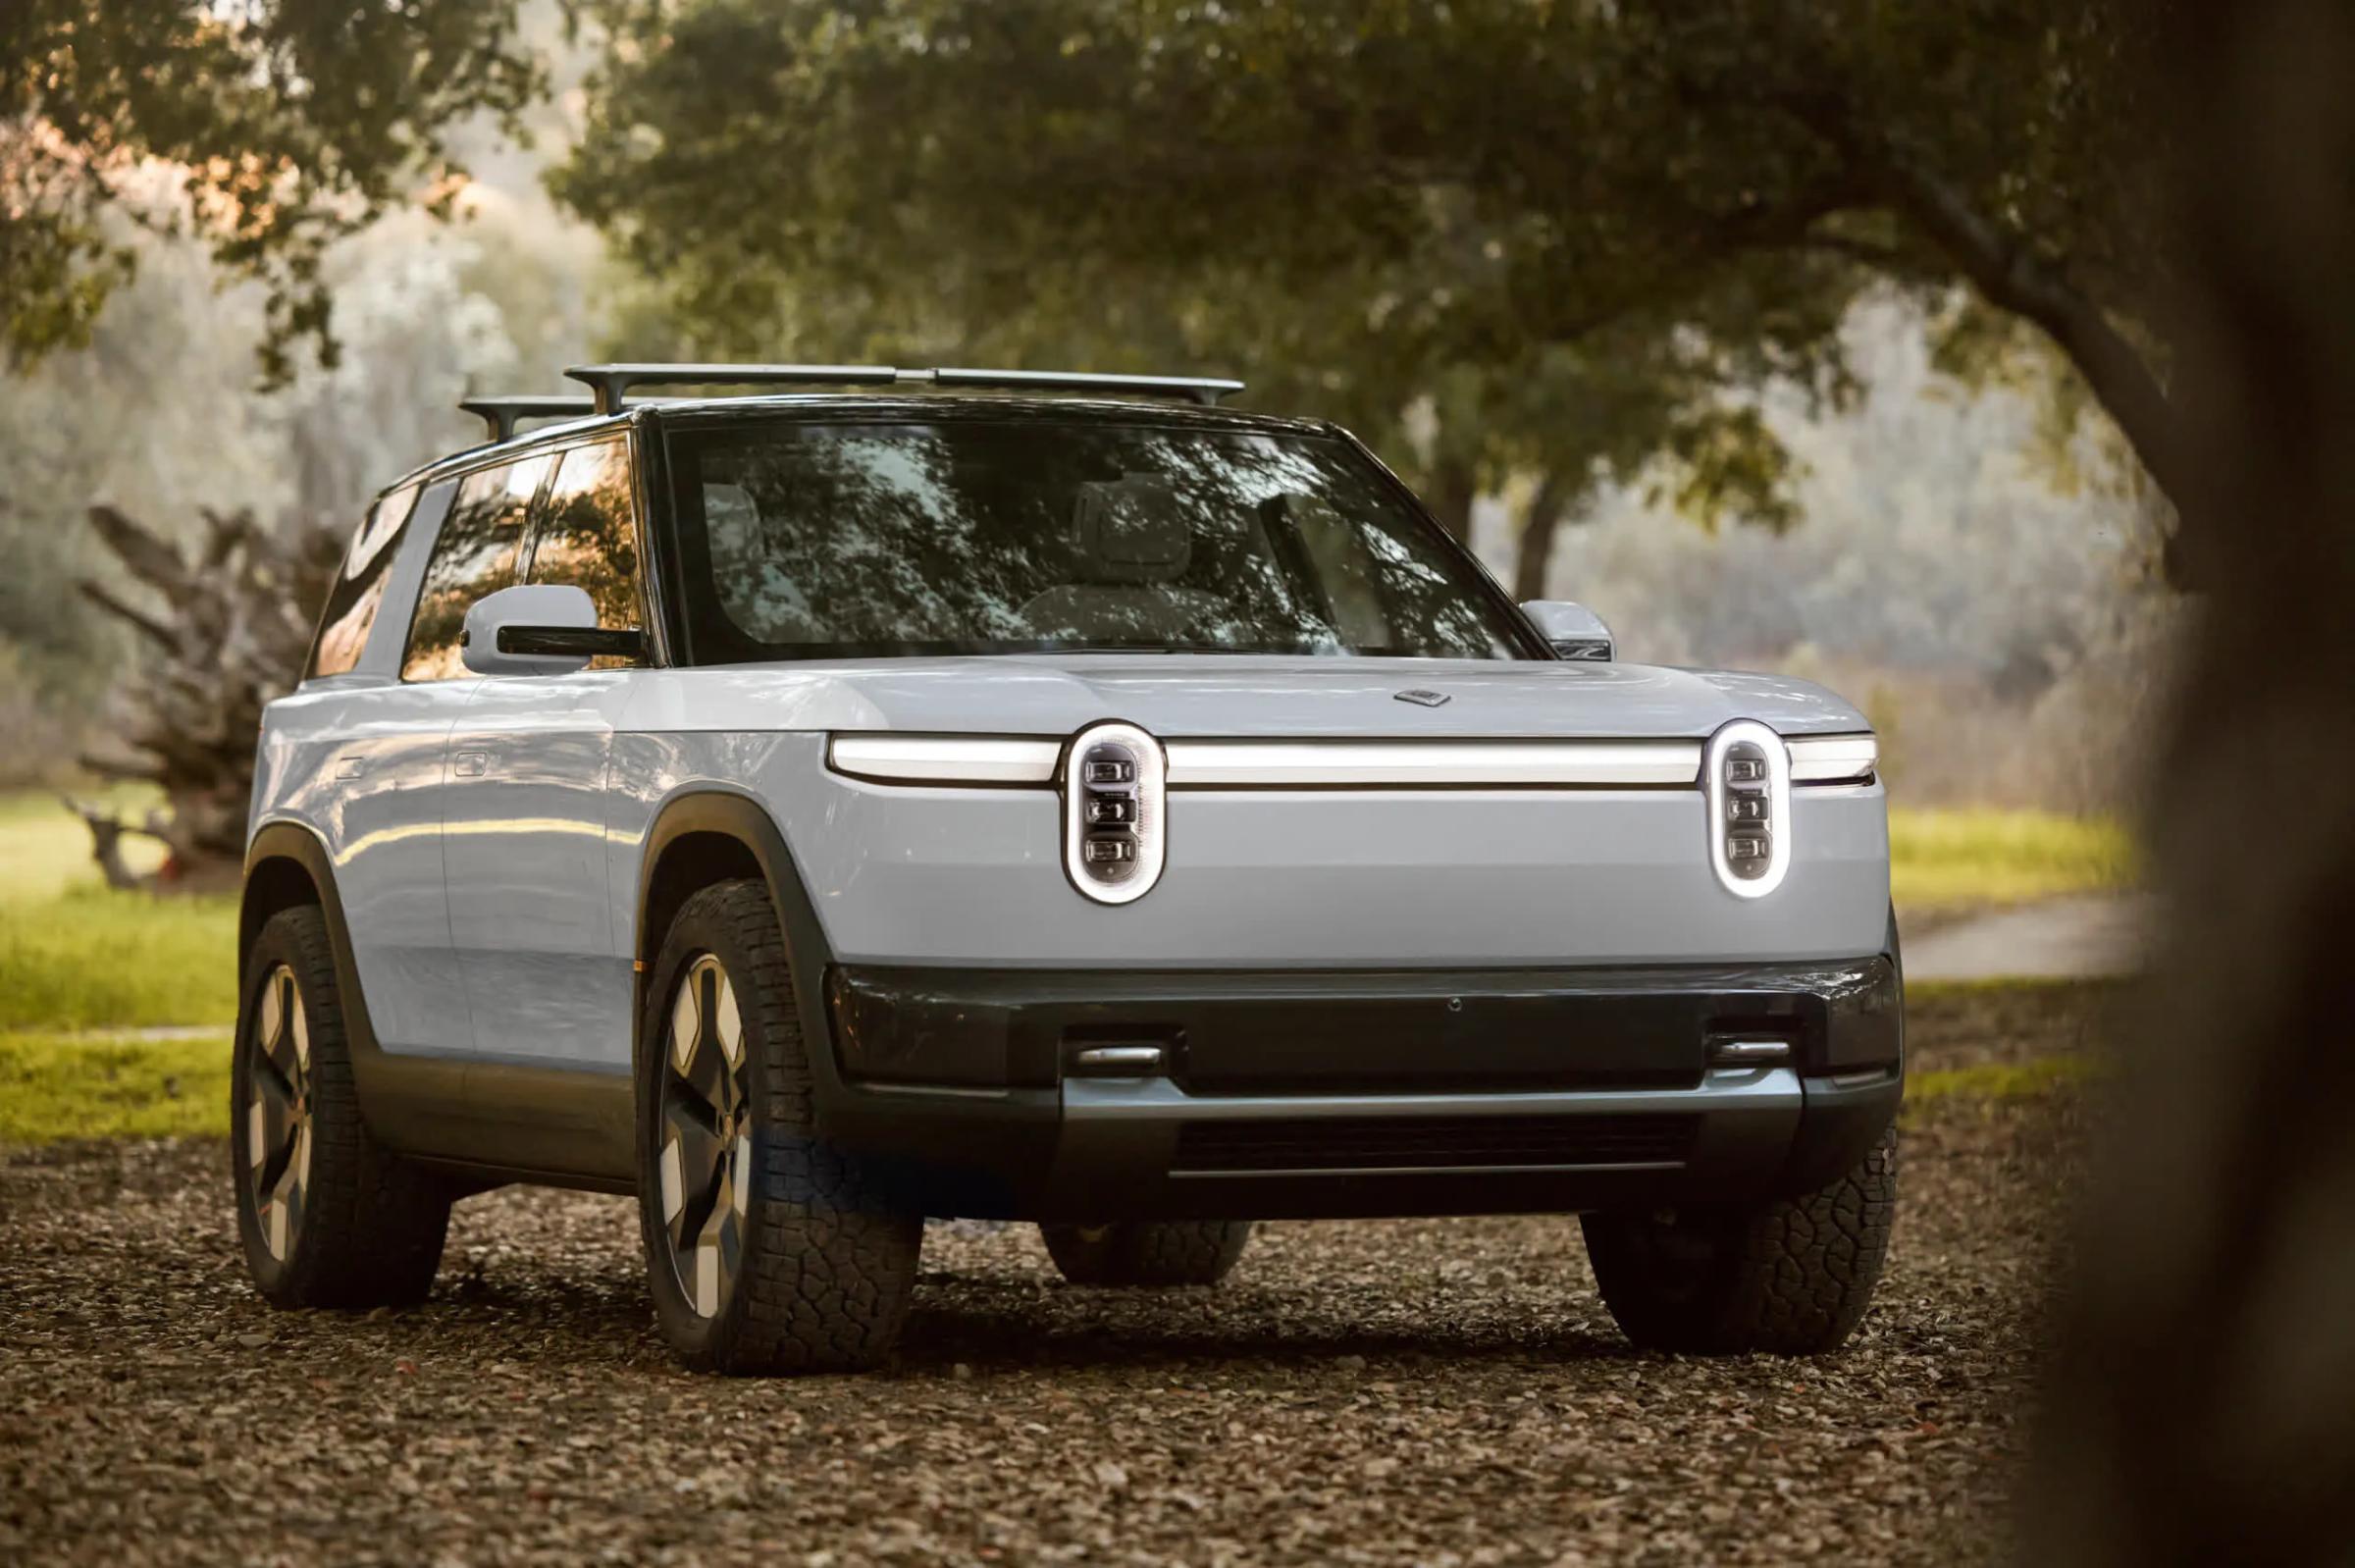 The Rivian R2 is set to be released in 2026